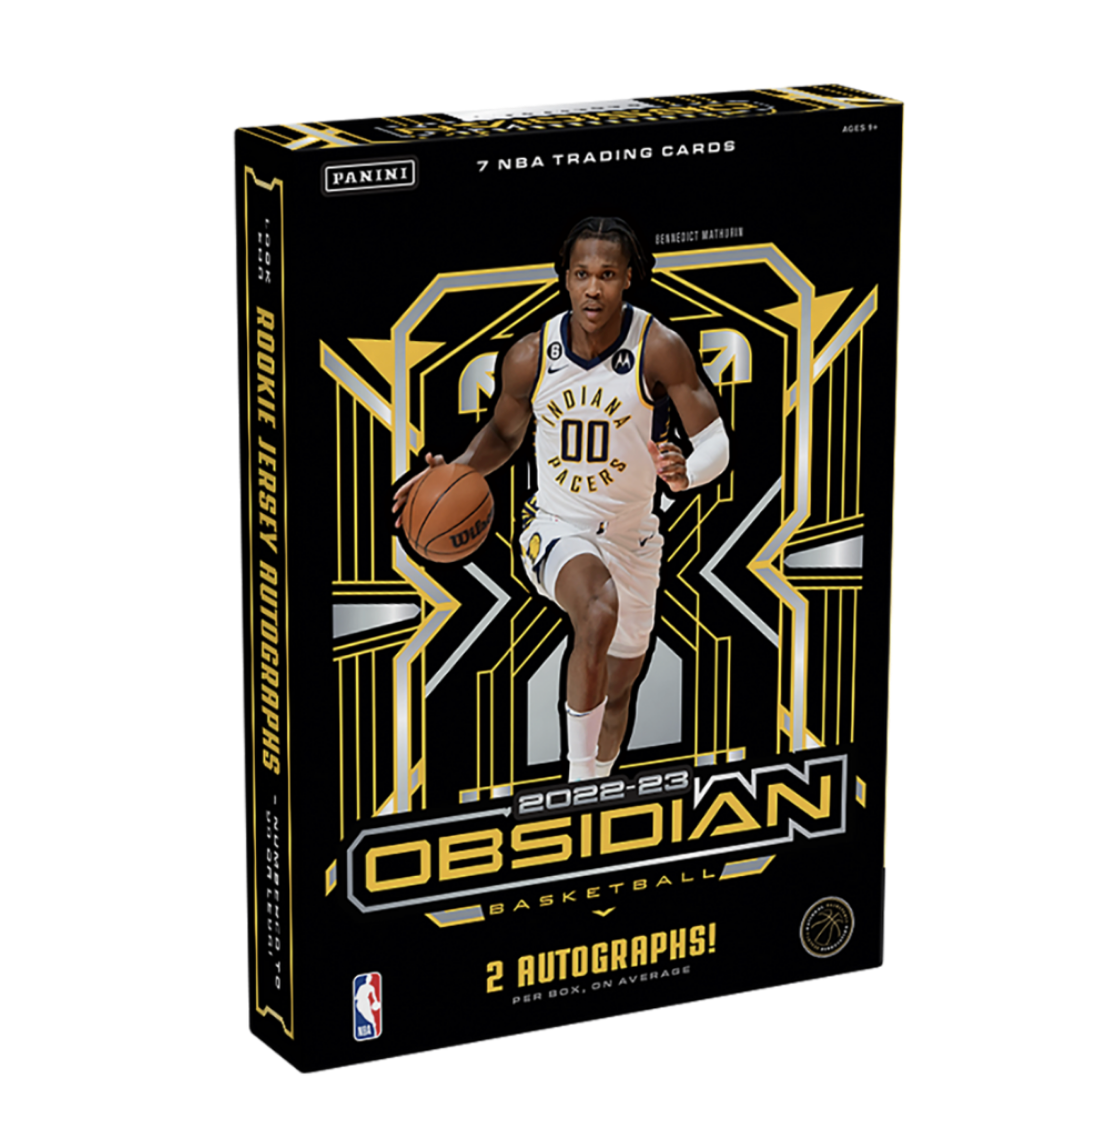 2022-23 Panini Obsidian Basketball Hobby (Klar for Pre-order) - Sports Cards Norge